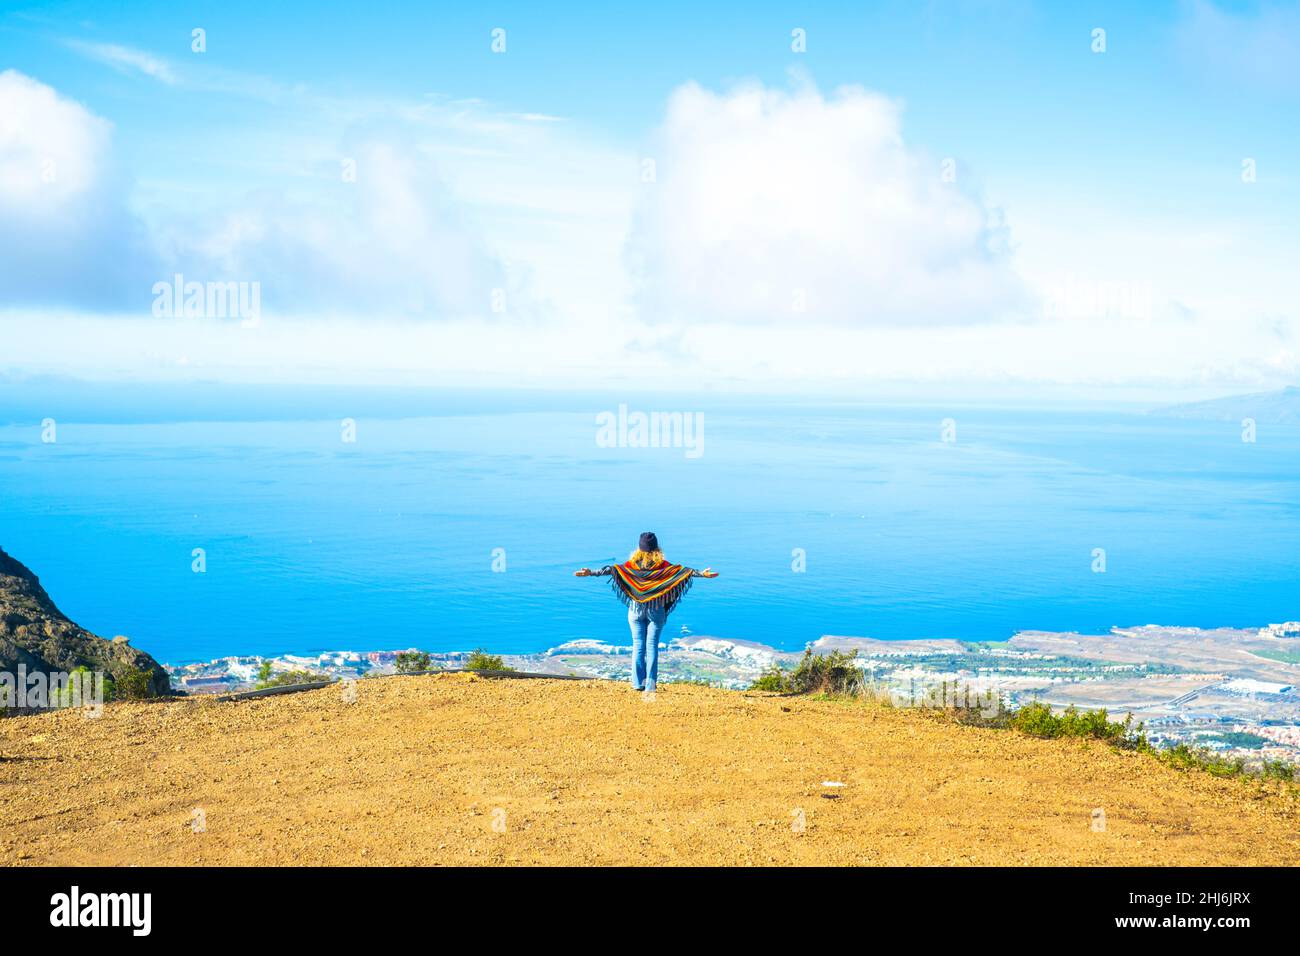 Tourist and freedom lifestyle people travel concept. Woman viewed from back opening arms to enjoy an amazing view and landscape. Blue ocean and sky fr Stock Photo